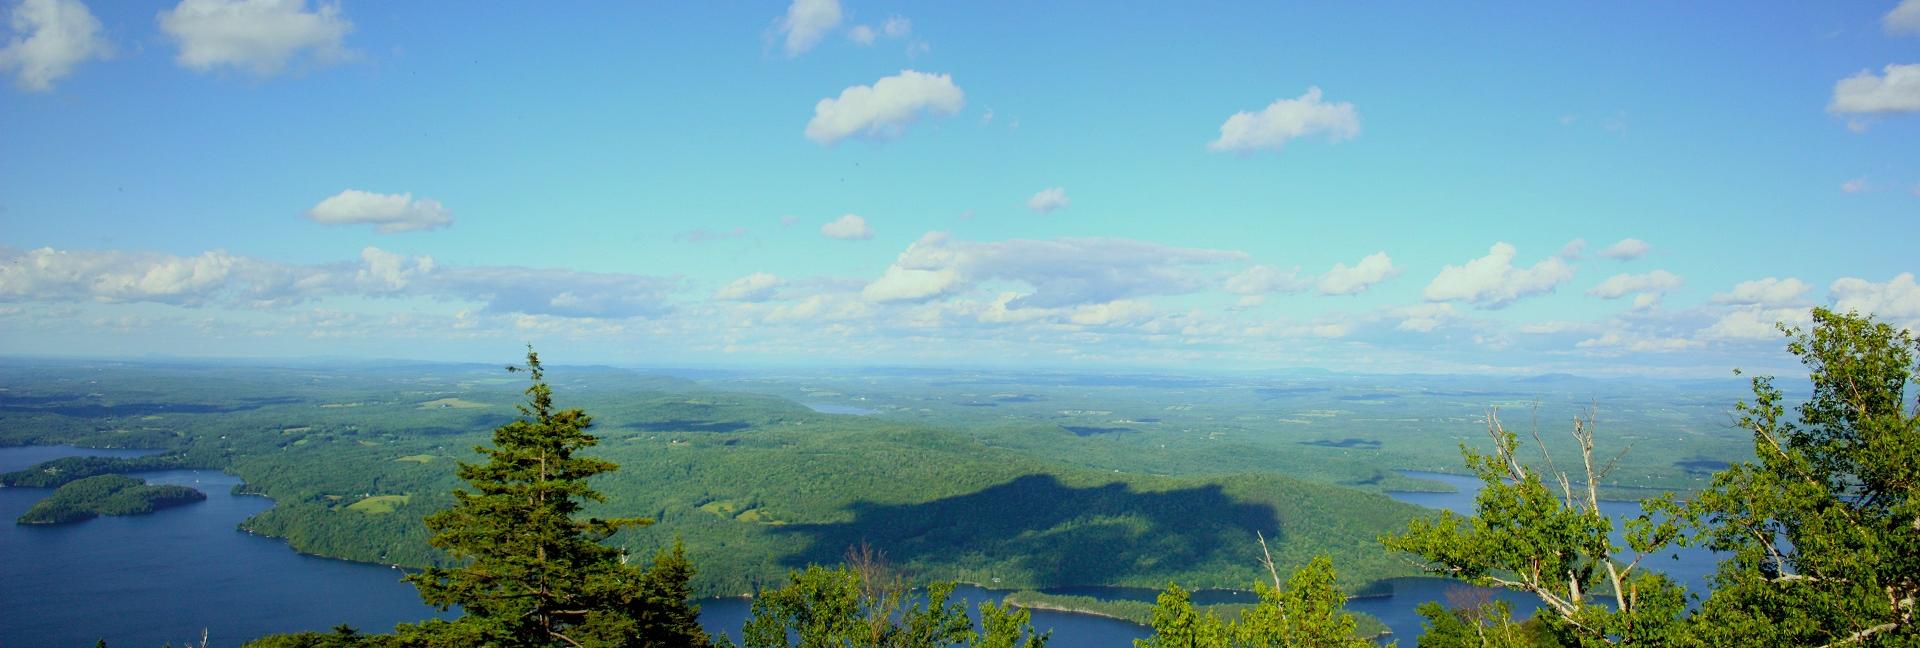 View of Lake Memphremagog from Owls Head mountain